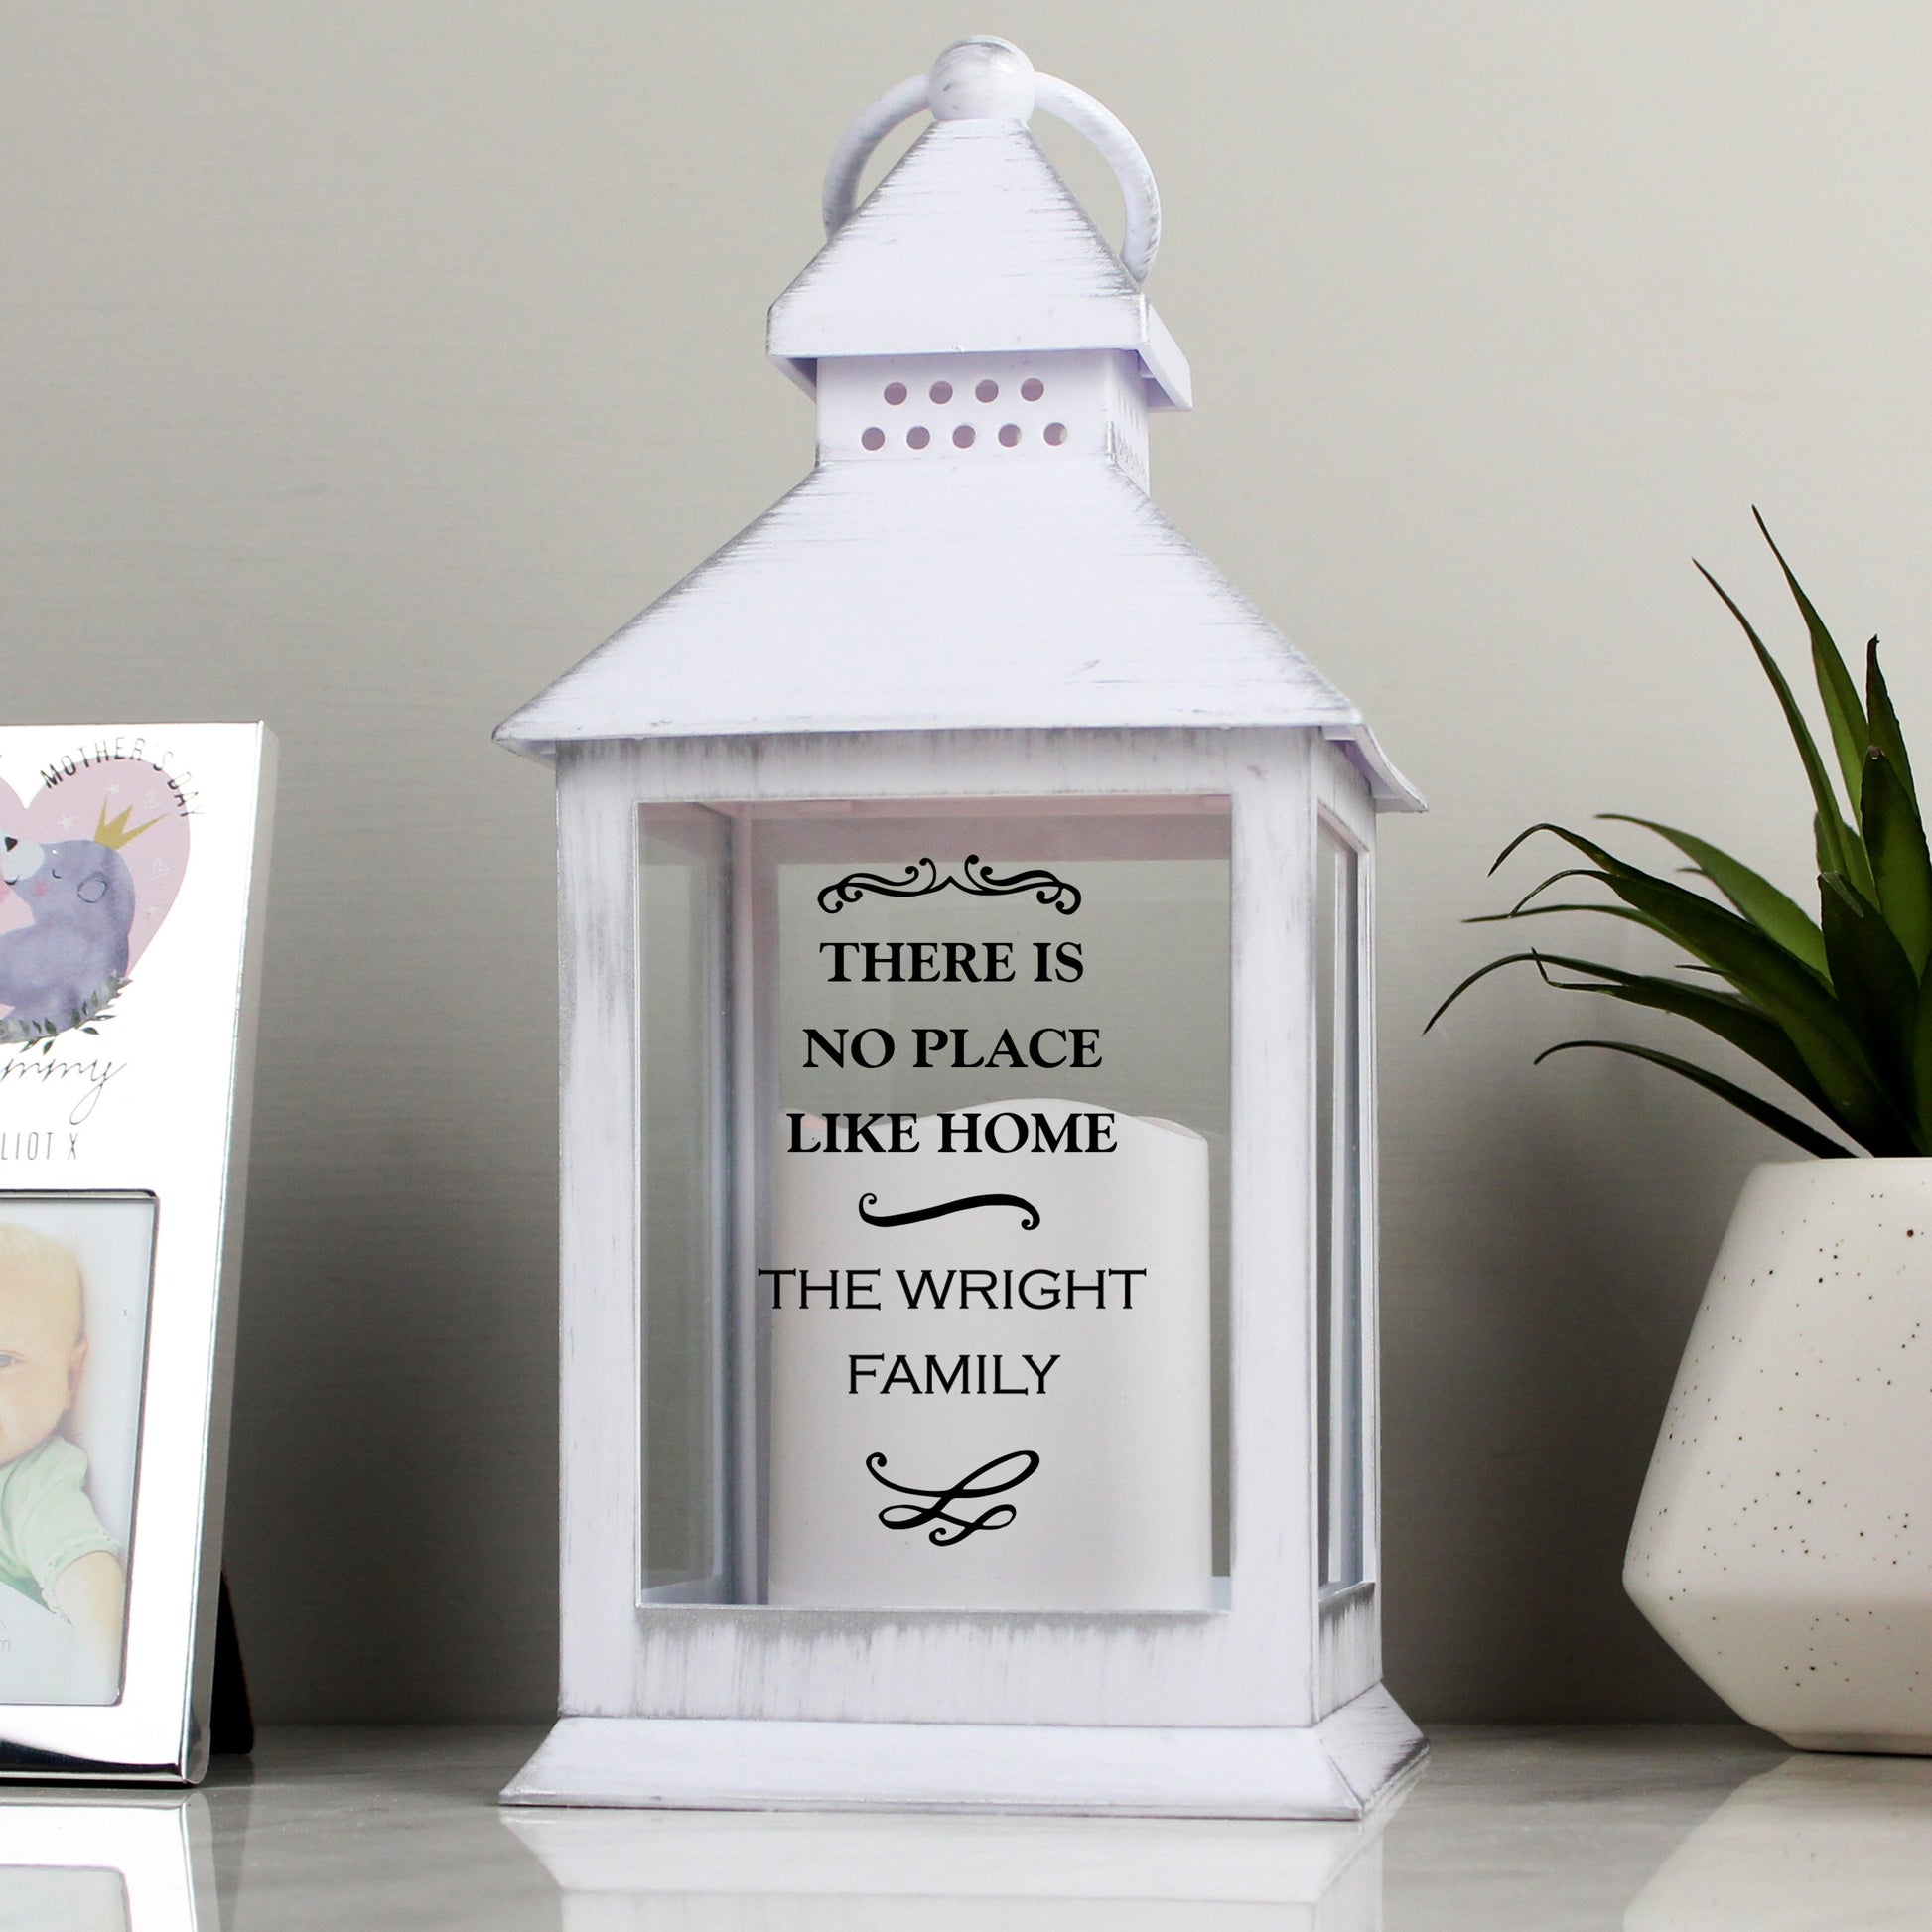 White lantern with black text printed on the front pictured with a potted succulent plant and silver photo frame on a white surface. By Sweetlea Gifts